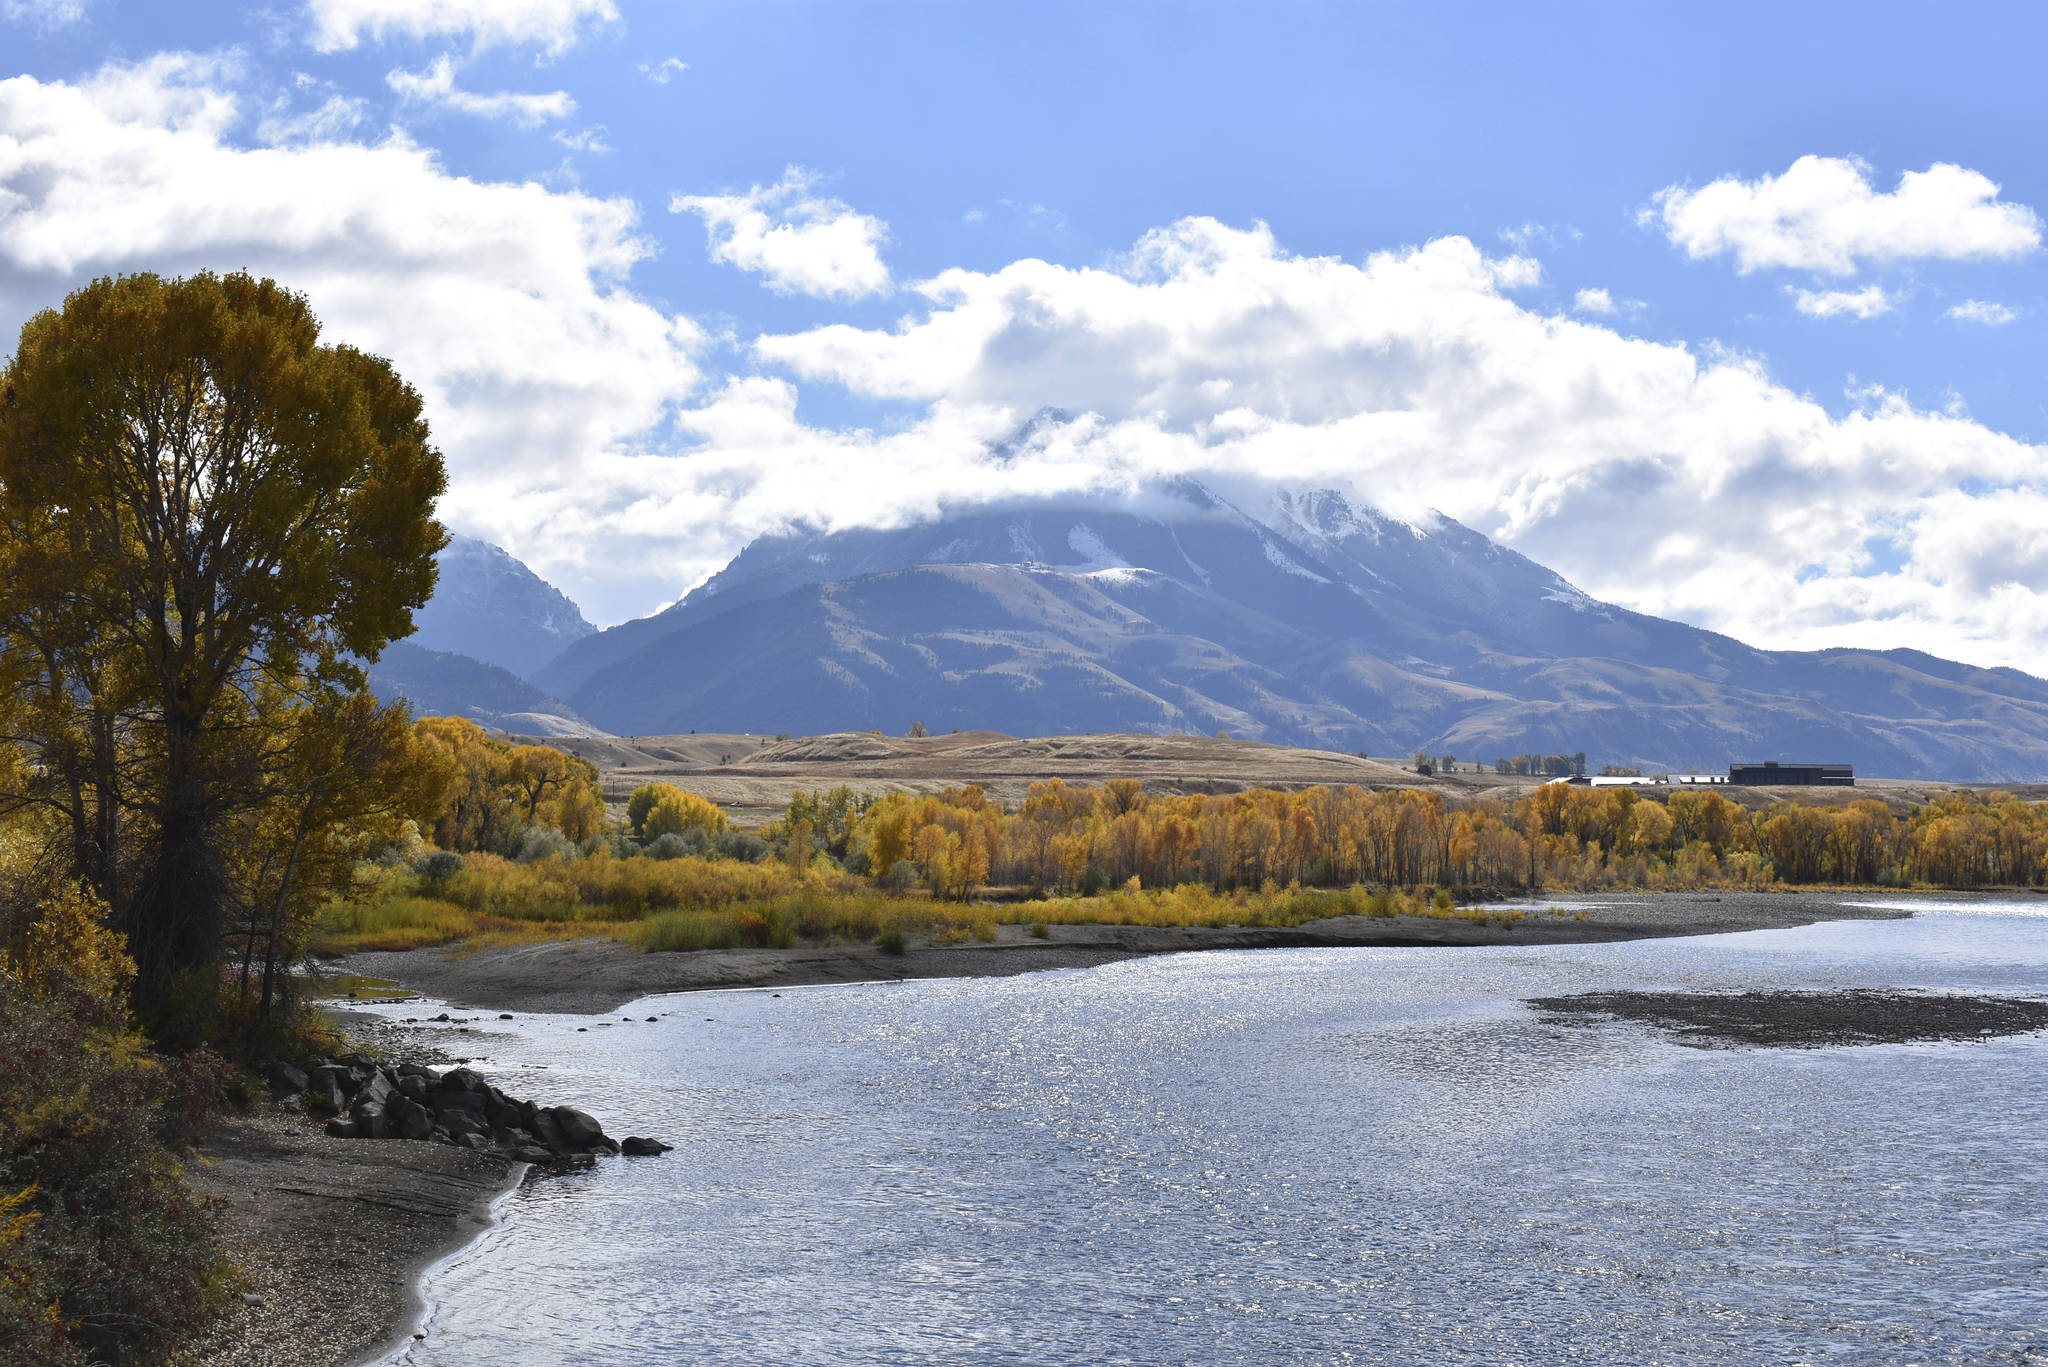 This photo shows Emigrant Peak rising above the Paradise Valley and the Yellowstone River near Emigrant, Mont. The Biden administration has nominated a longtime environmental advocate and Democratic aide, Tracy Stone-Manning, to oversee roughly 250 million acres of public lands as director of the Bureau of Land Management. (AP Photo / Matthew Brown)